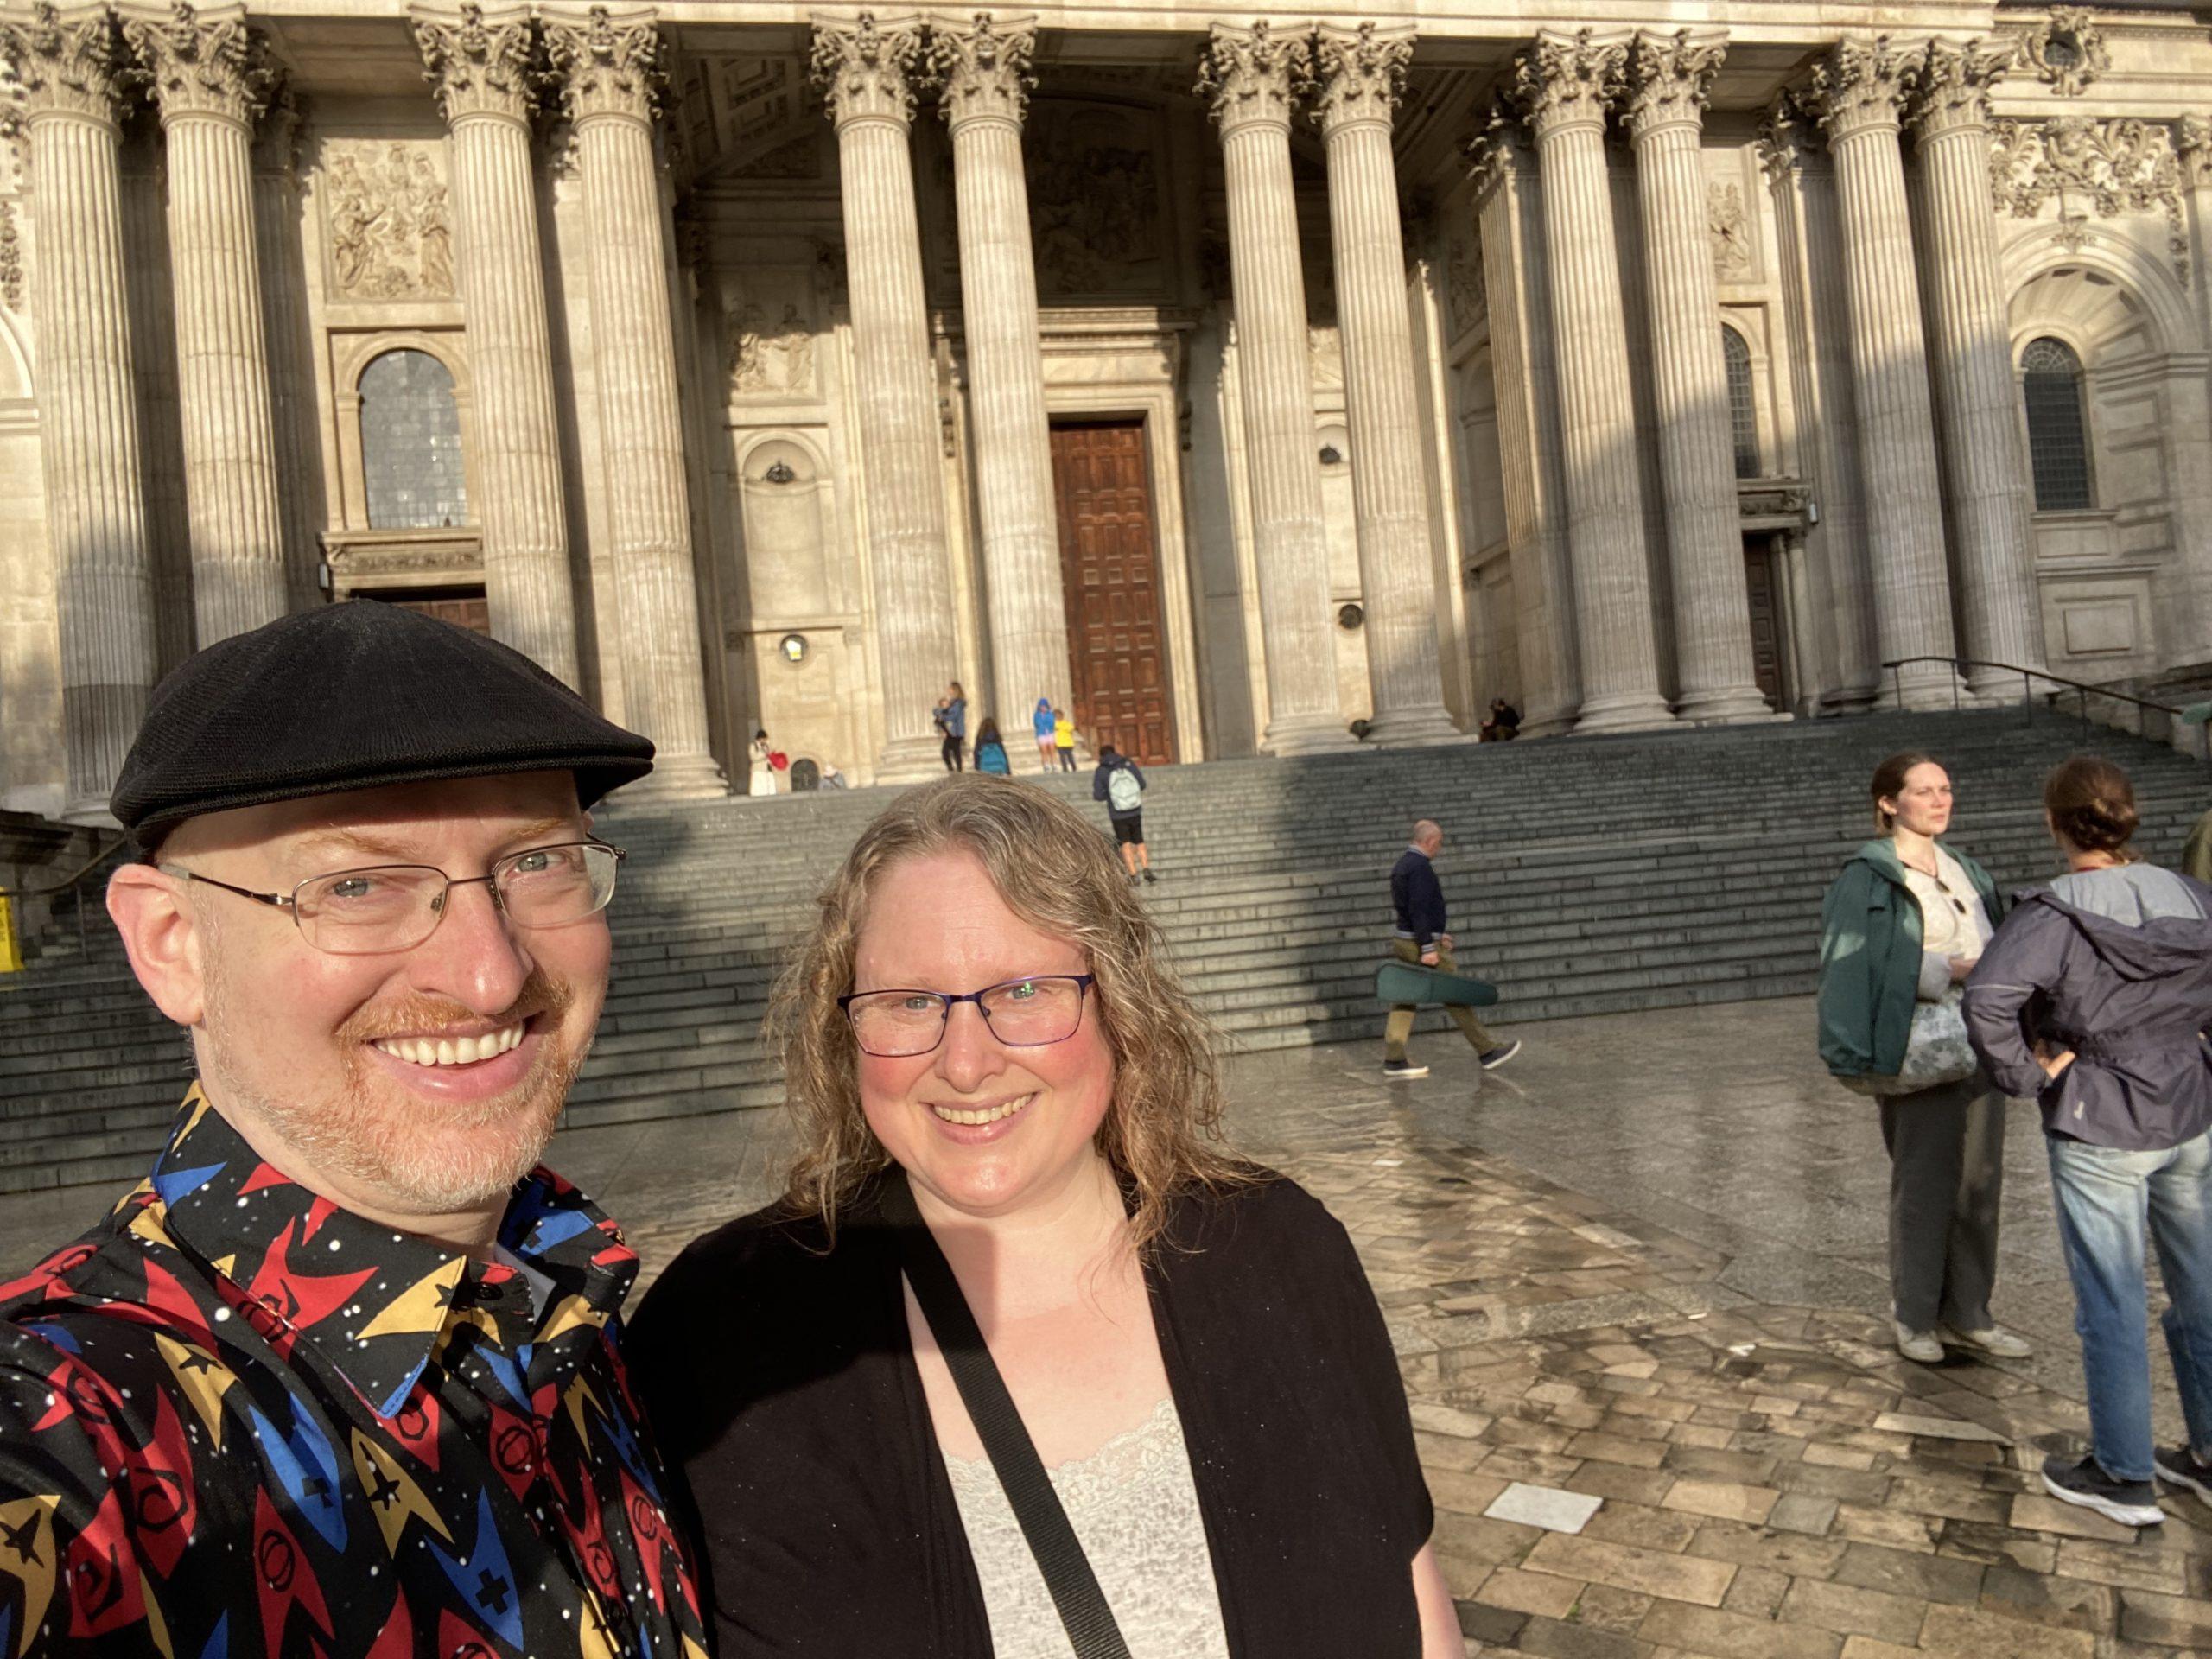 My wife and I in front of the front steps of St. Paul's Cathedral.